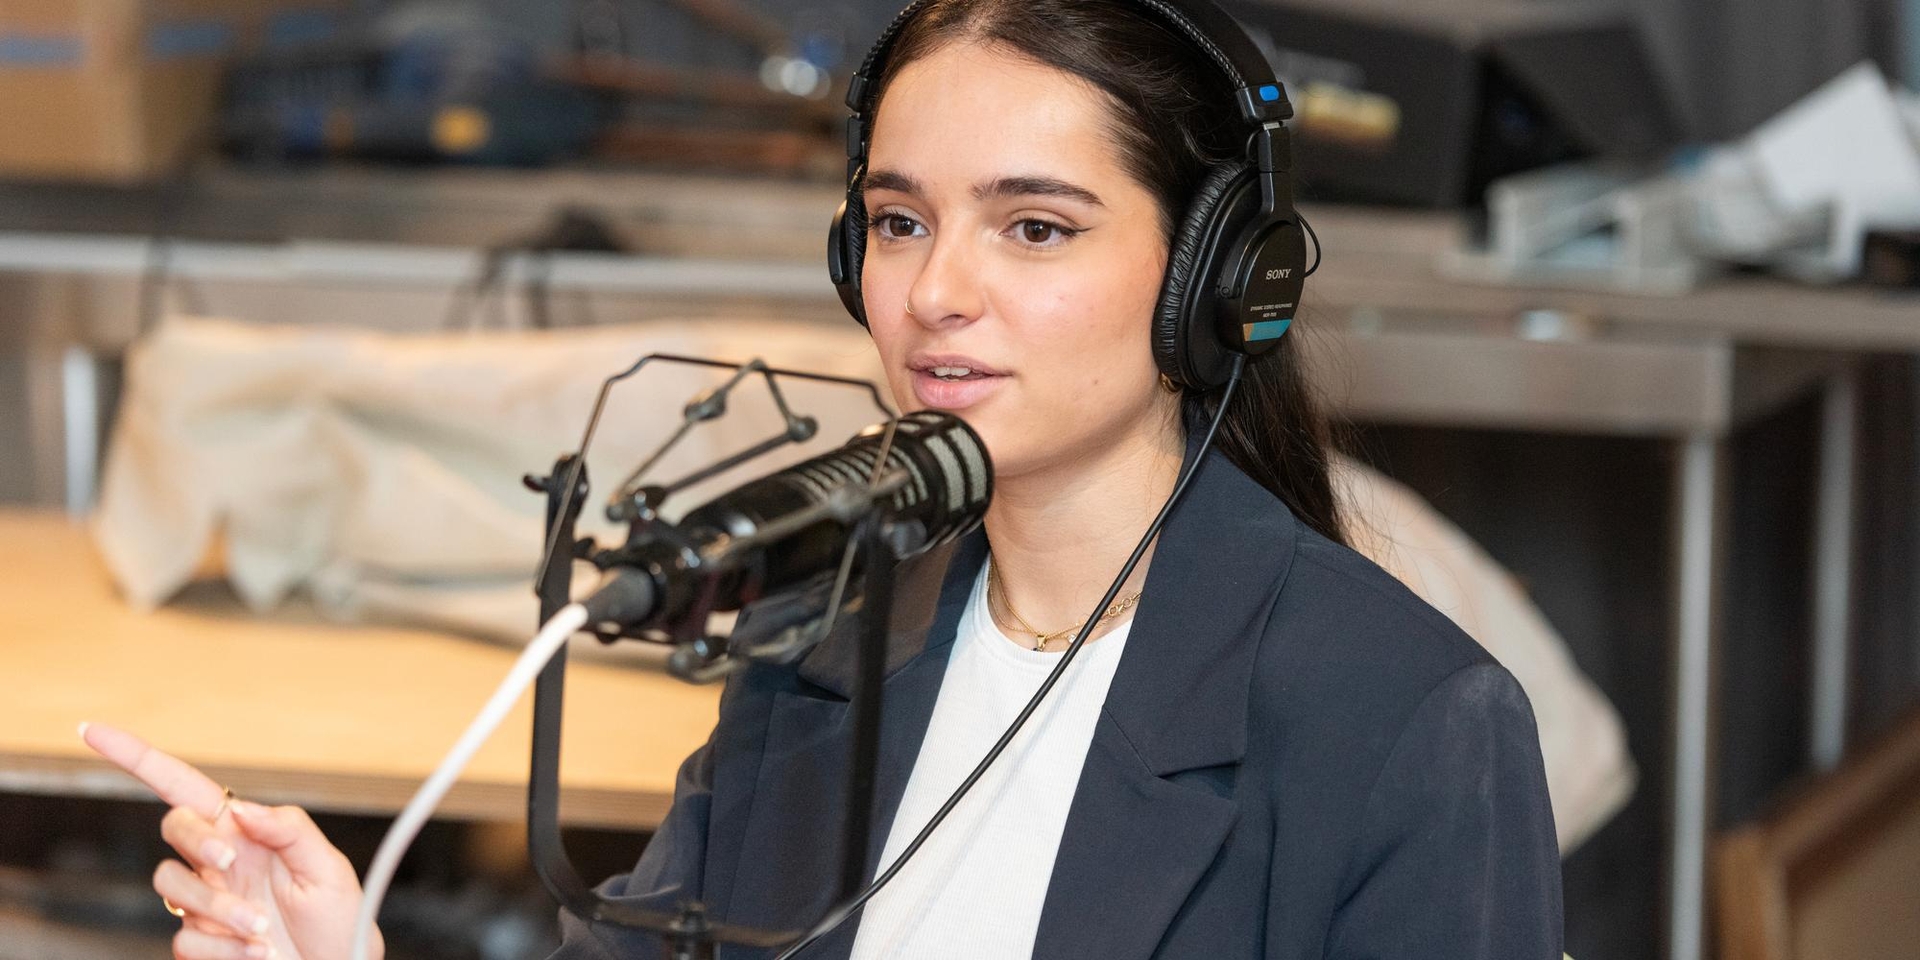 Grace Hardy speaks into microphone while recording her podcast